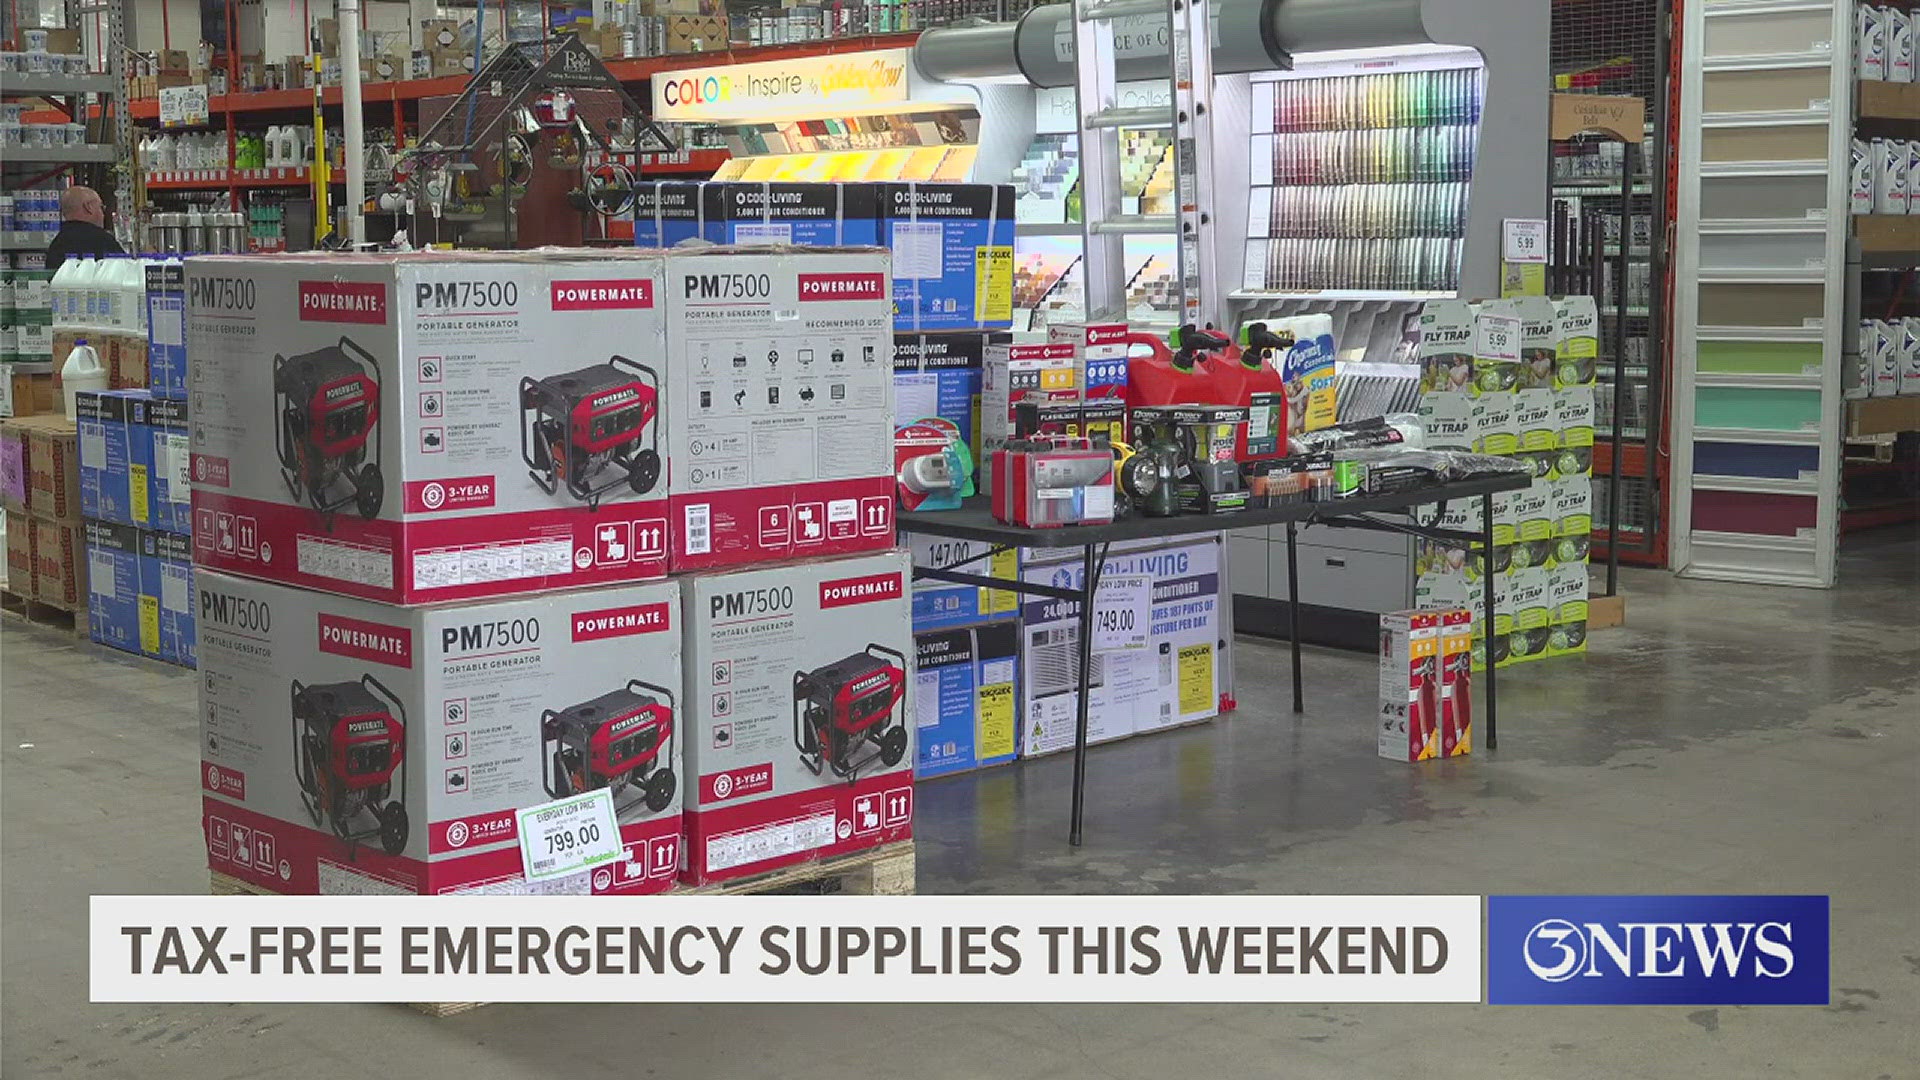 Beginning Saturday you can buy emergency preparation supplies that will be tax exempted. For a list of tax-free items check out our website kiiitv.com.